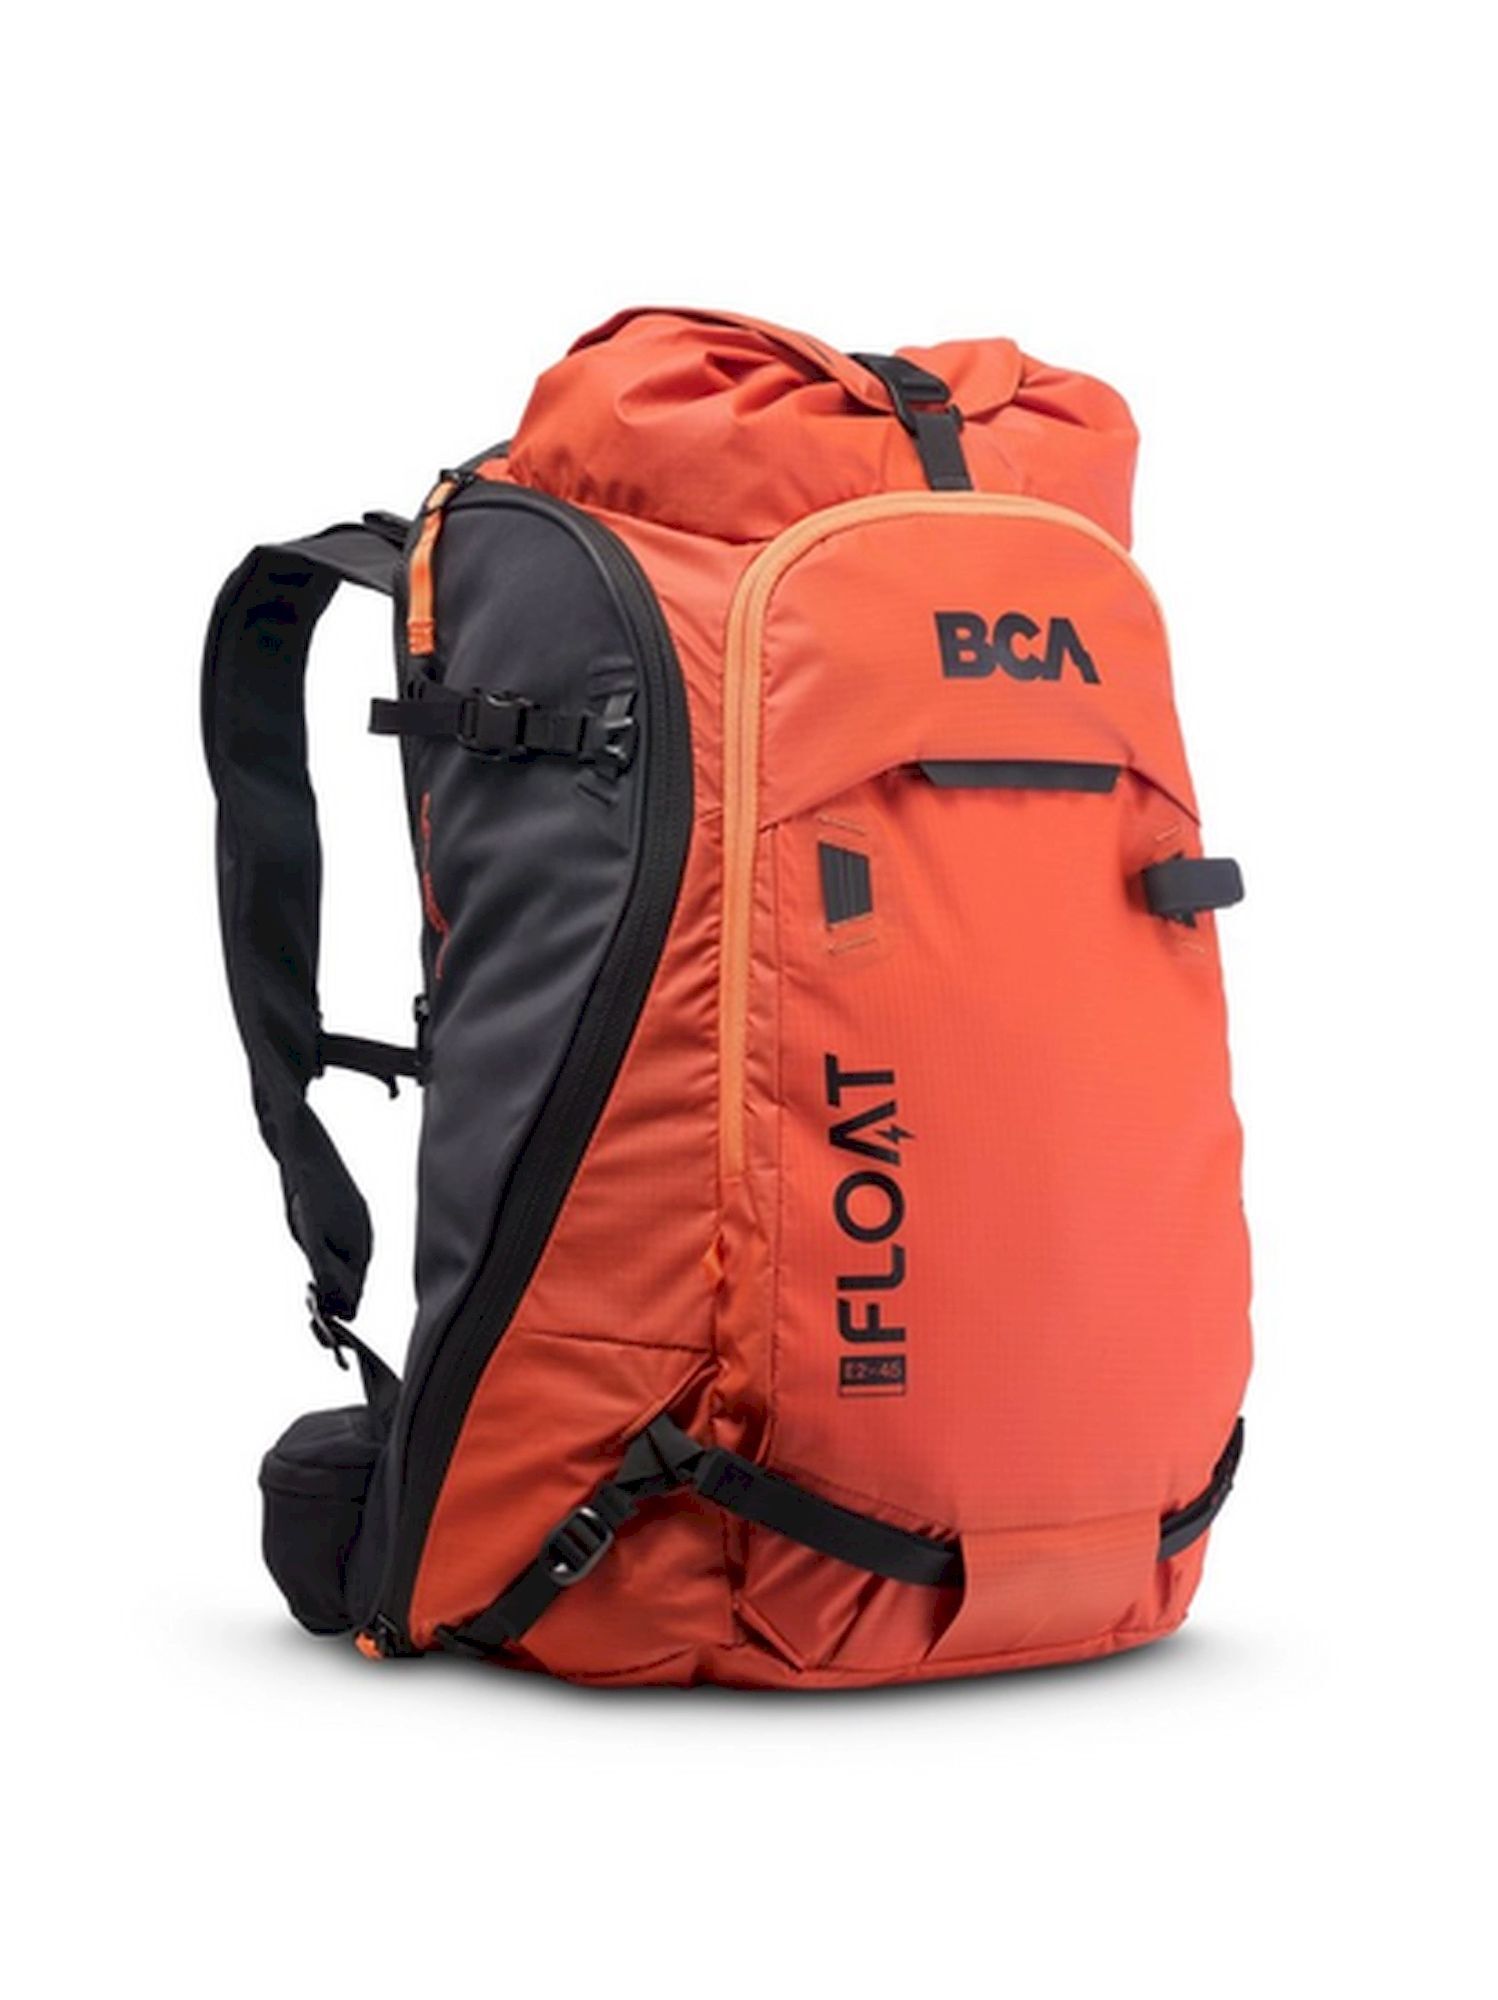 BCA Float E2 45 - Avalanche airbag backpack | Hardloop